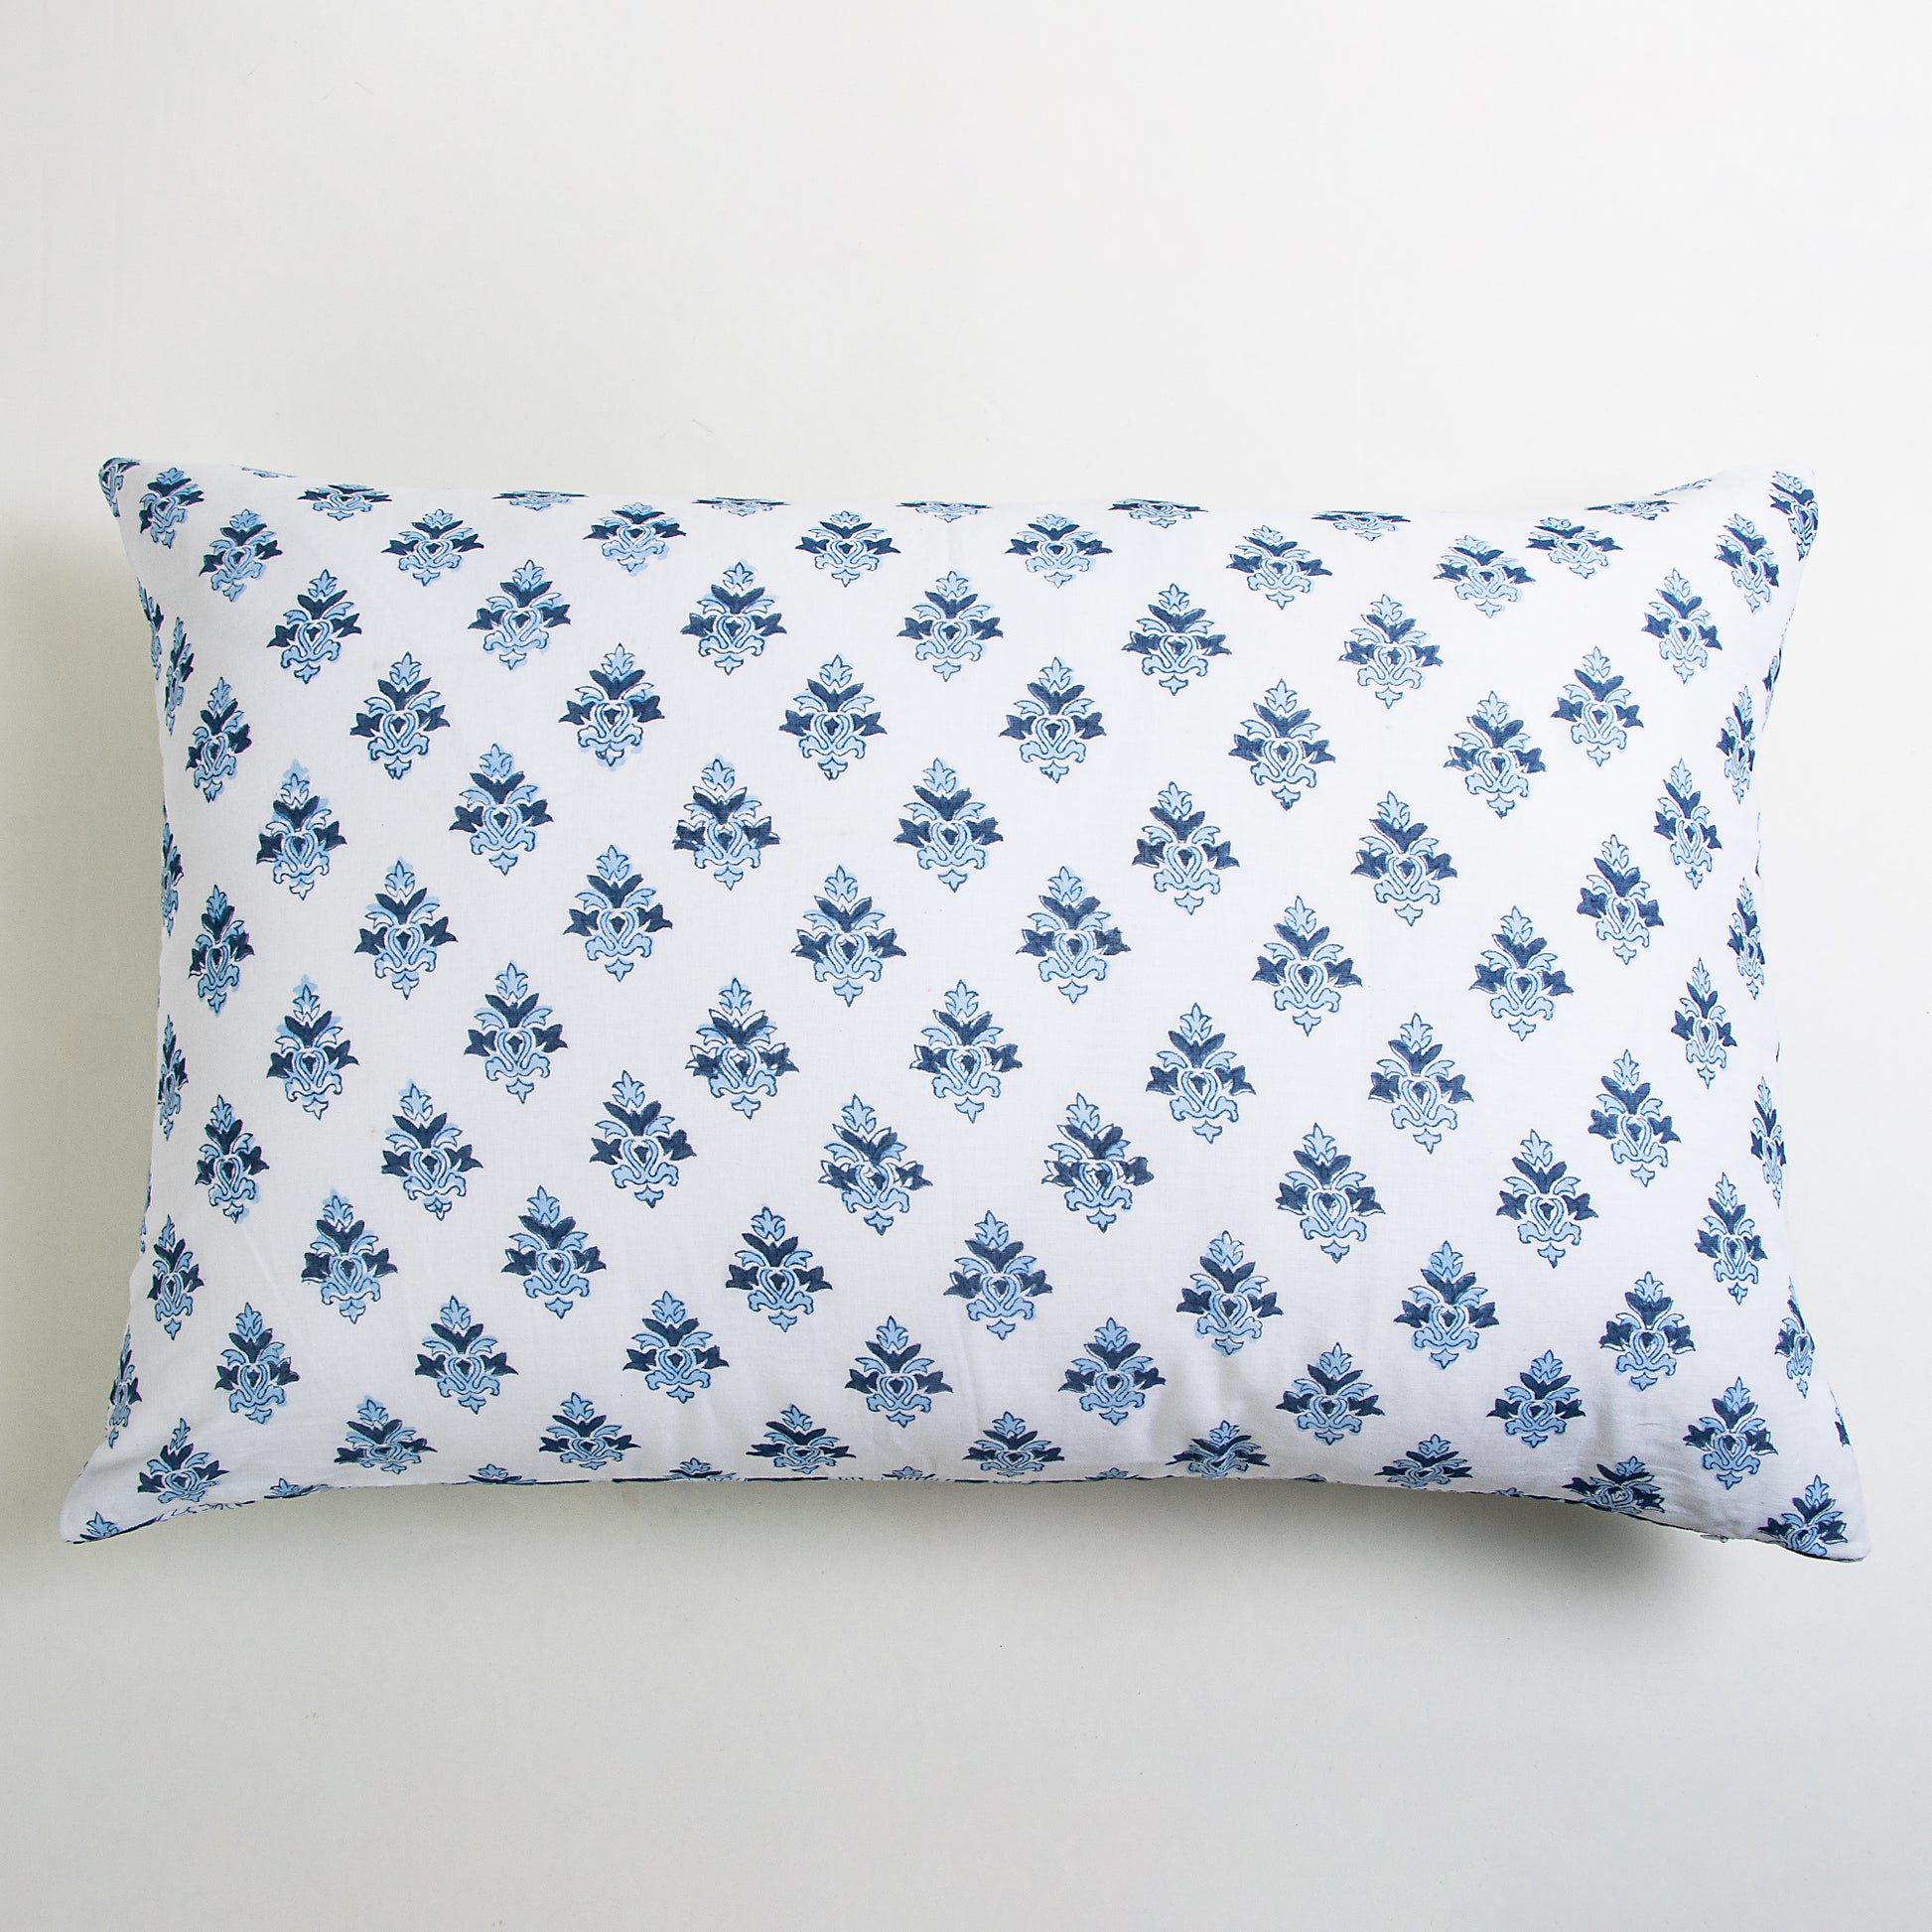 Hand Block Cotton Reversible Printed Pillow Cover Online